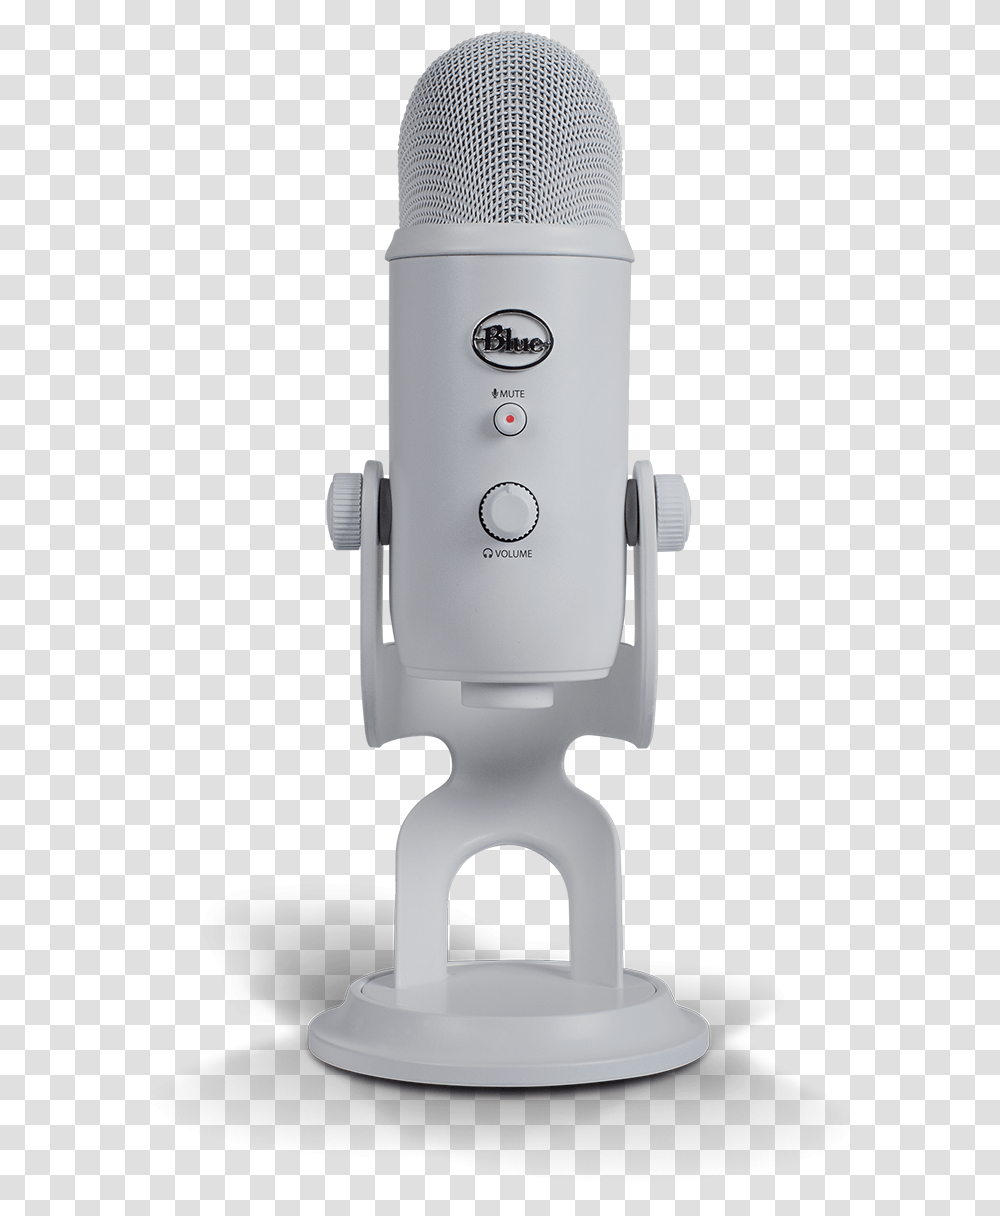 Snowball Stand & Free Standpng Blue Yeti Microphone Background, Chair, Furniture, Robot, Microscope Transparent Png